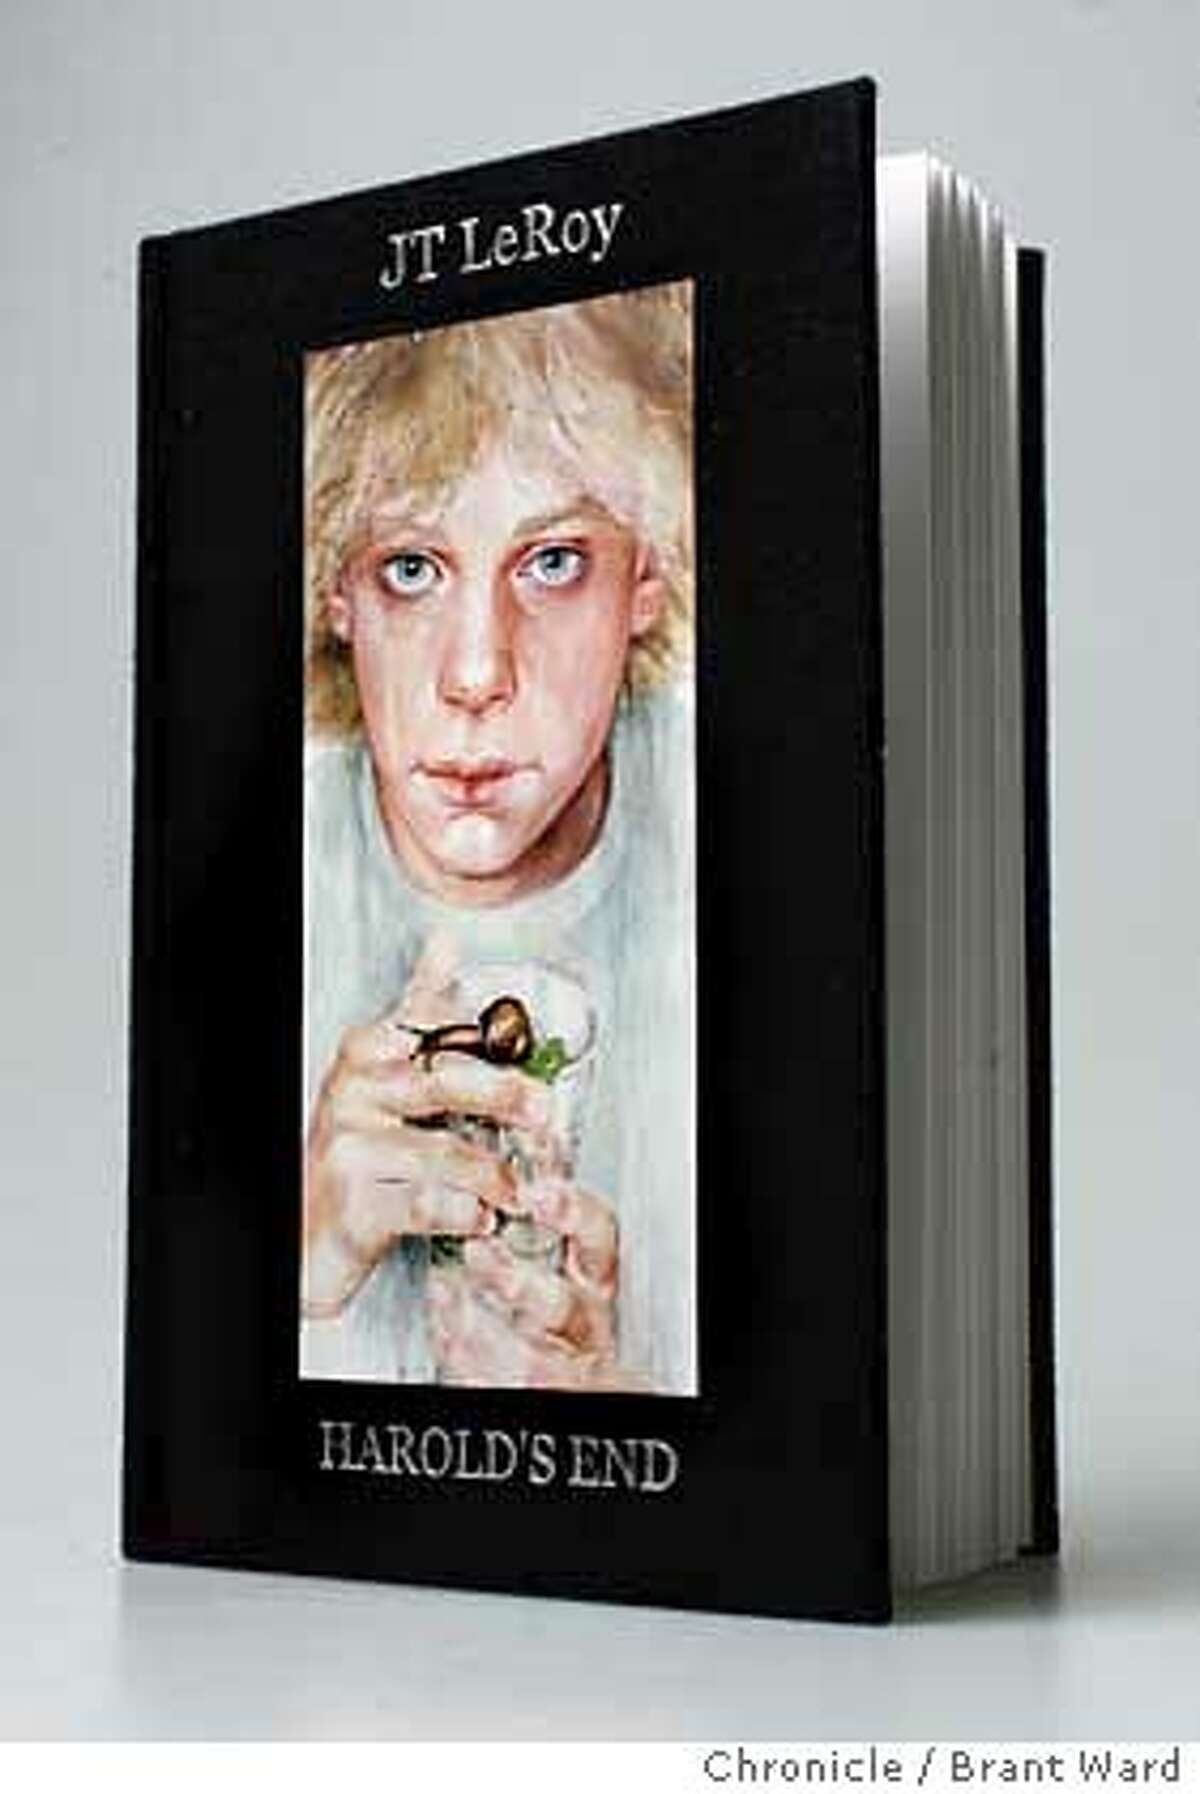 JTLeRoy011_ward.jpg "Harold's End," a new book by author J.T. LeRoy. Brant Ward1/9/06